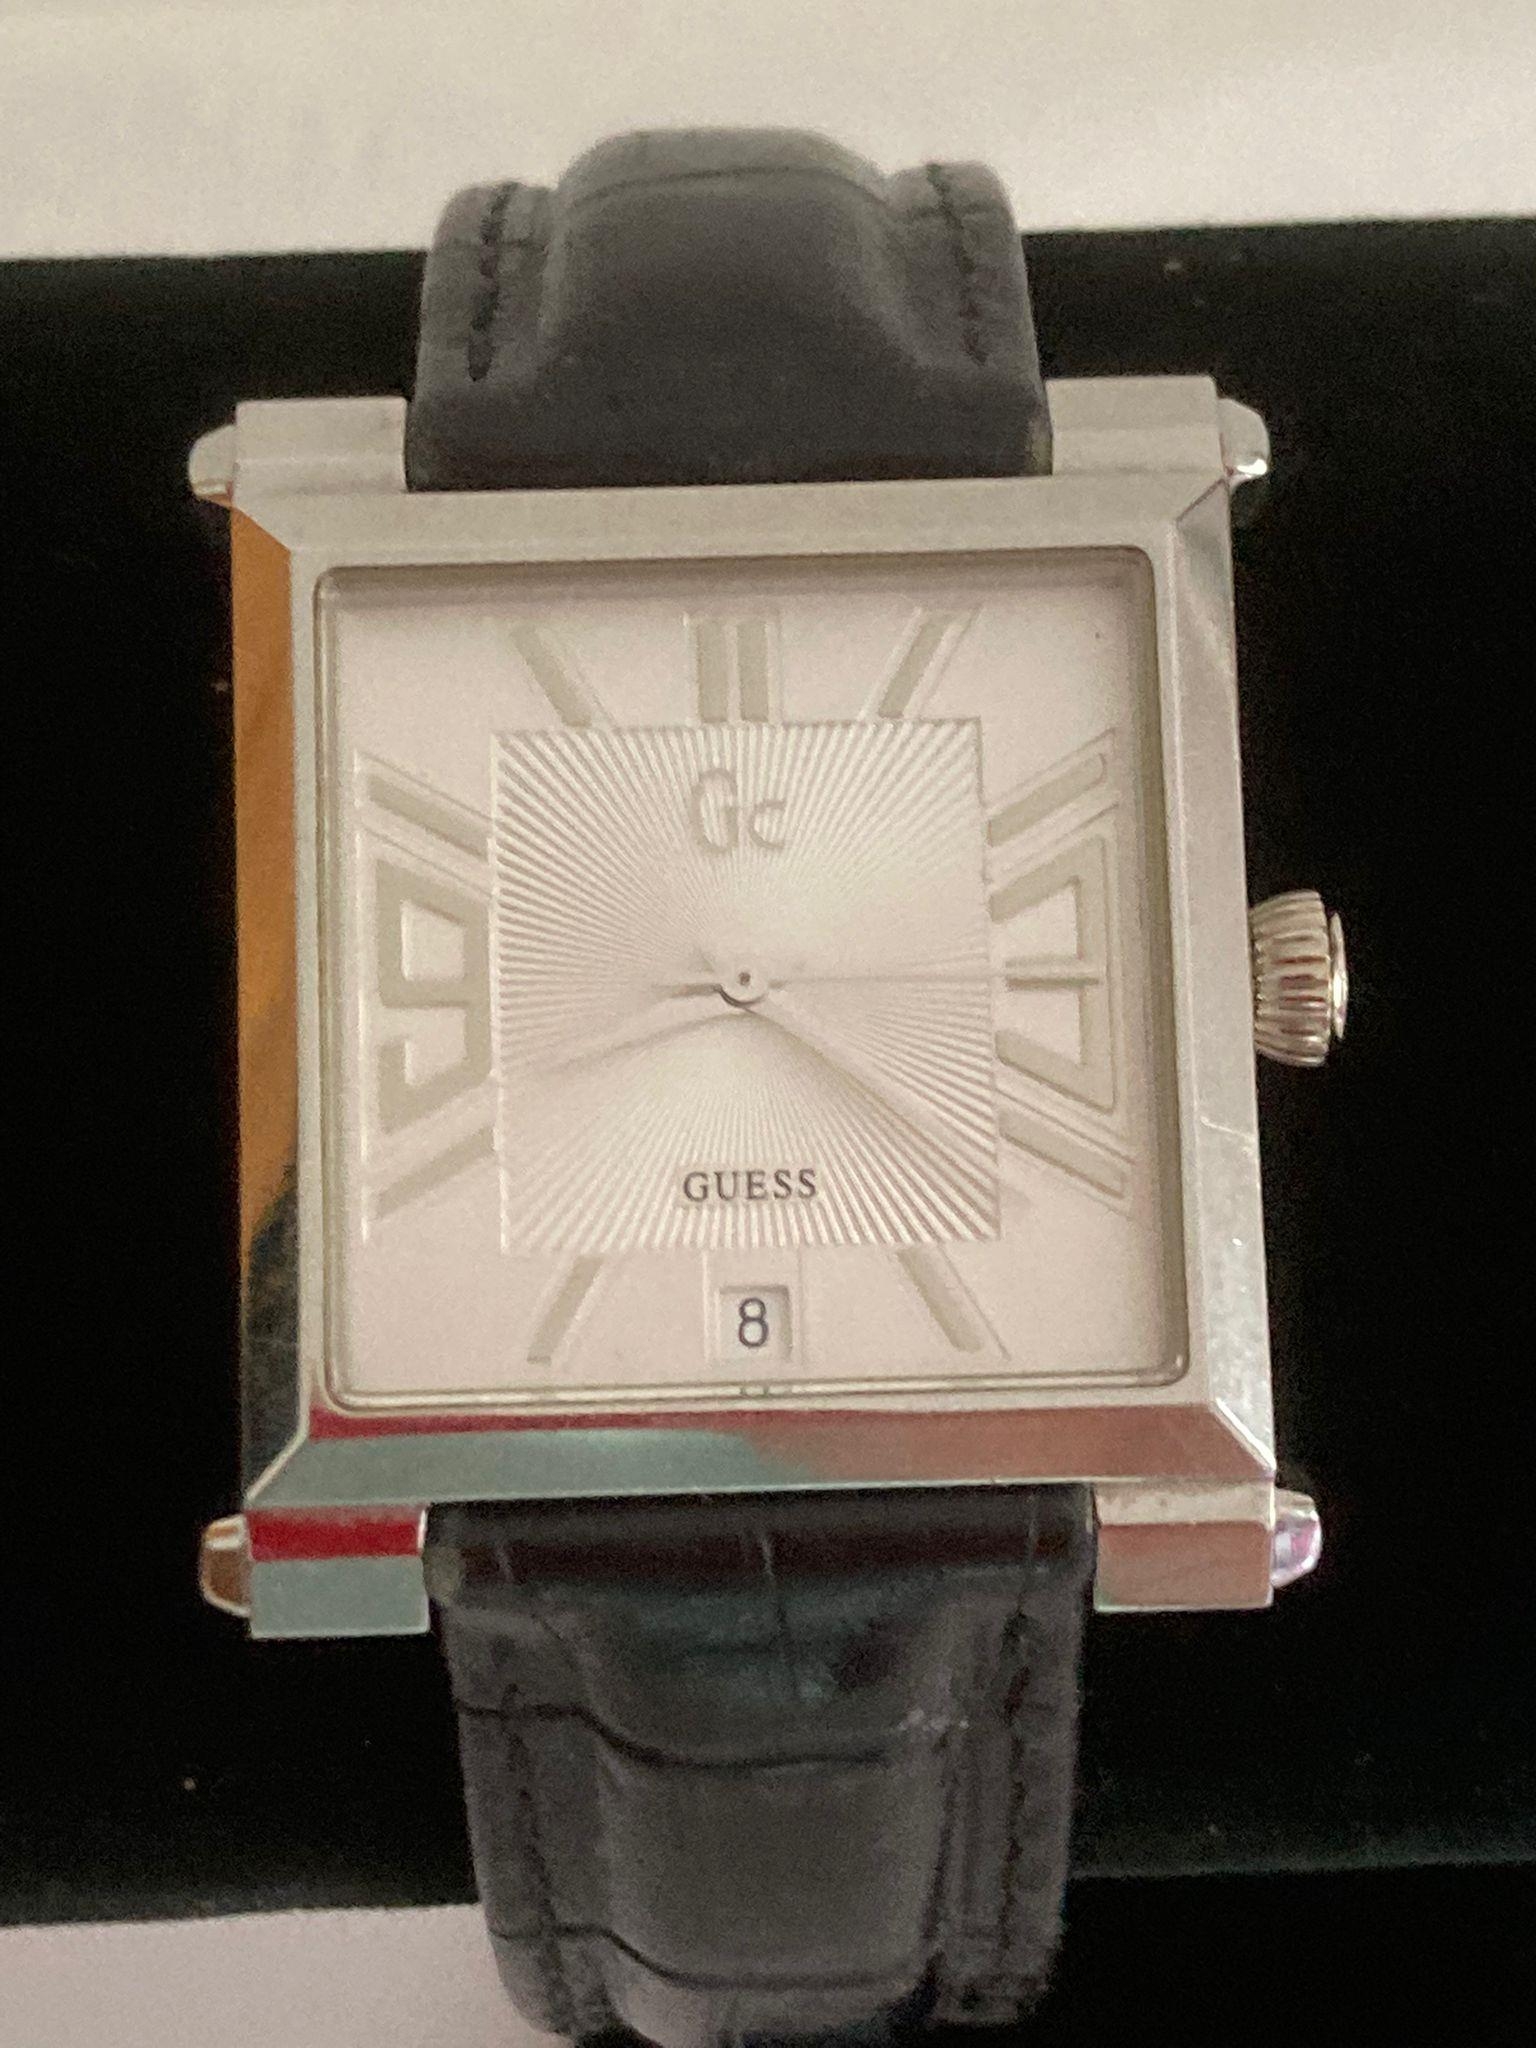 GUESS WRISTWATCH in ART DECO form Having large square face with retro 1920s numerals and sunray